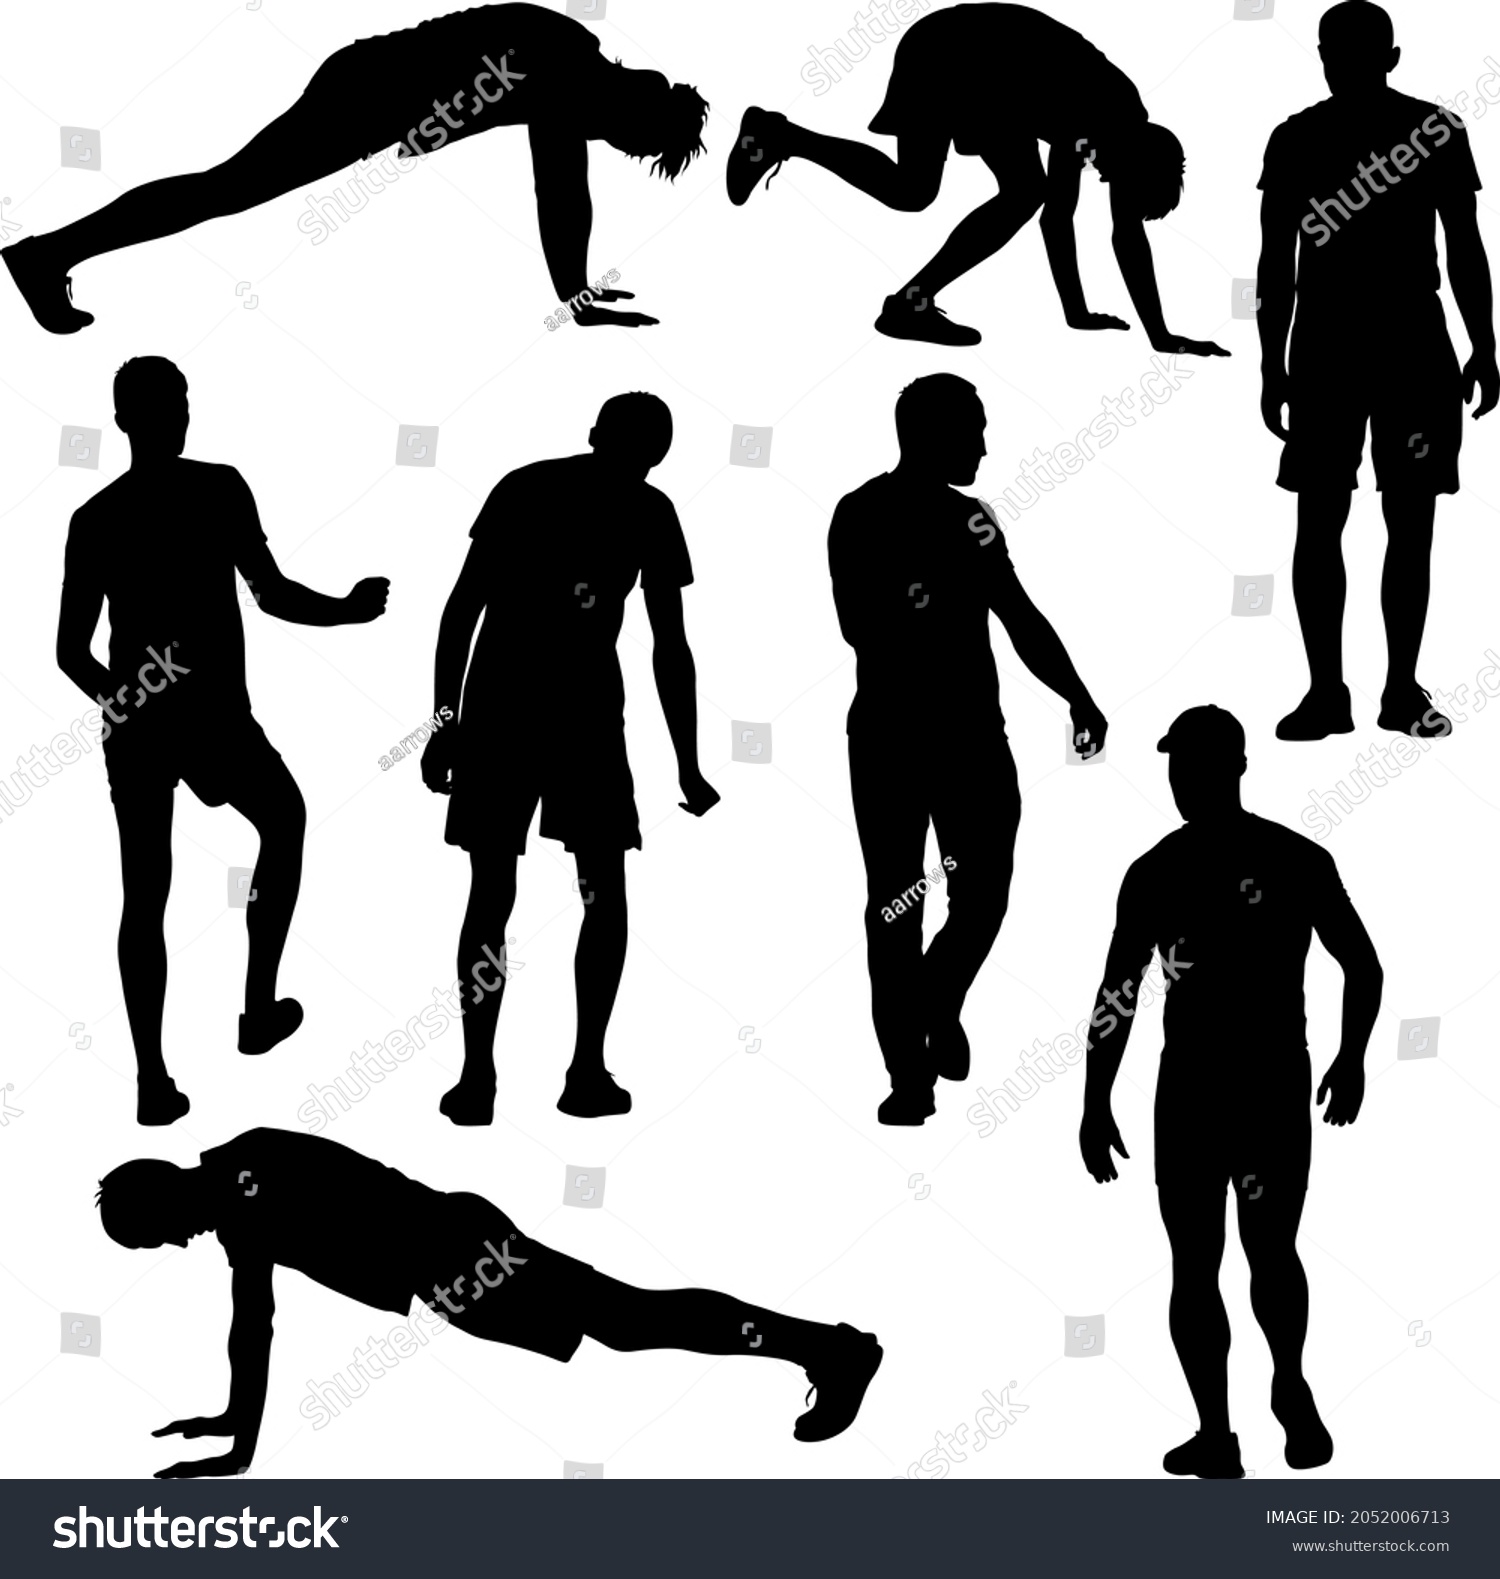 Silhouette People Different Poses Bent Over Stock Vector Royalty Free 2052006713 Shutterstock 